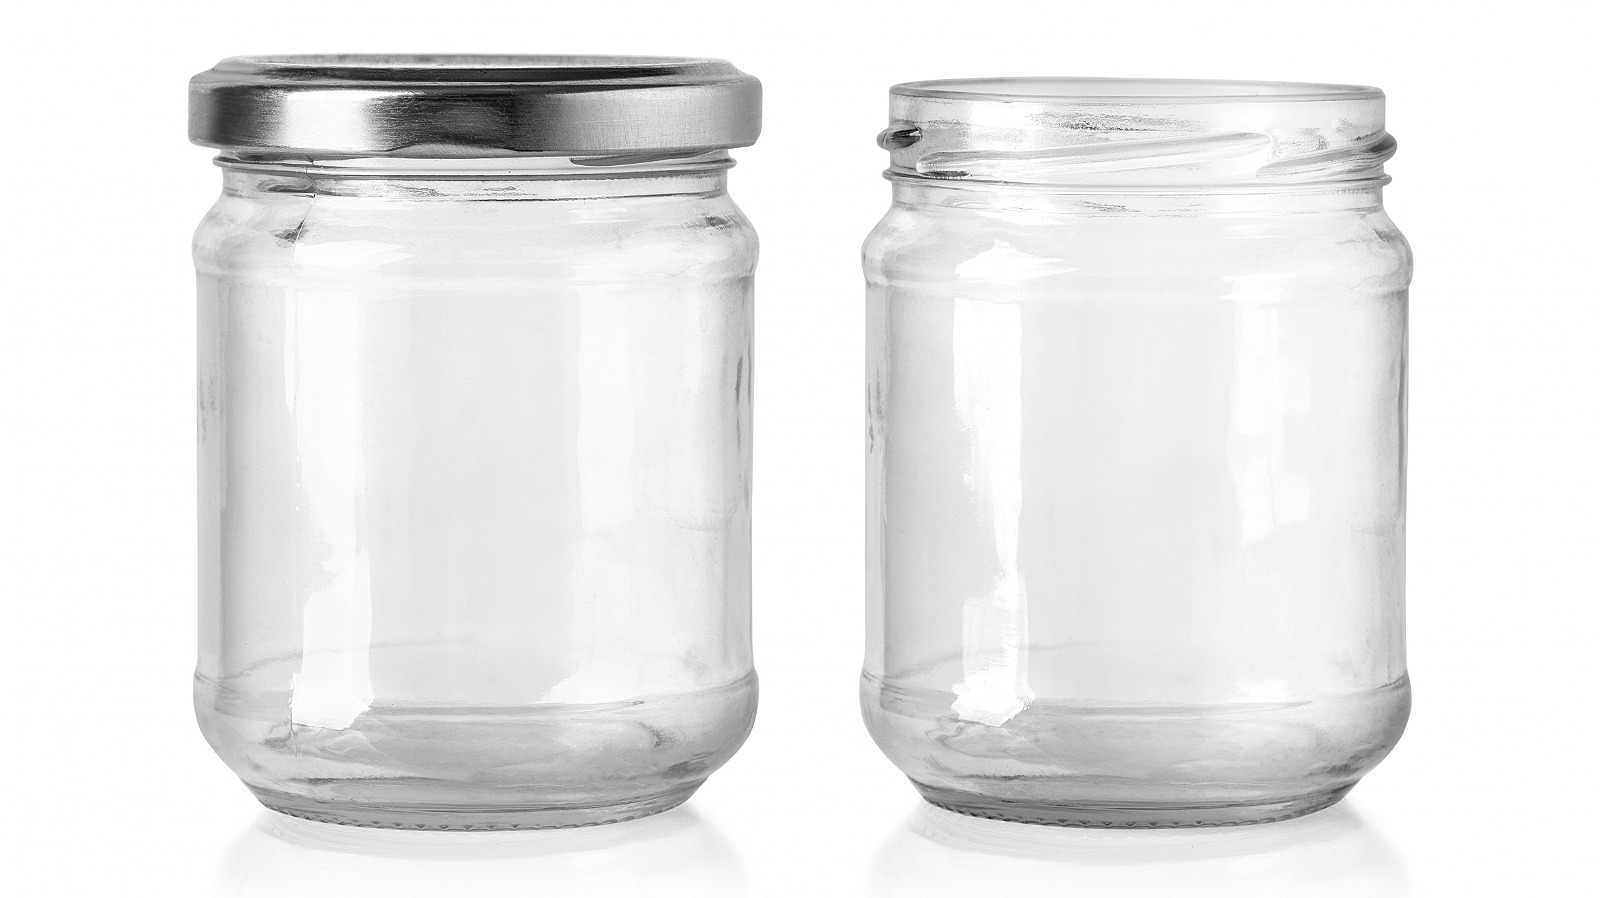 This Is The Best Way To Open A Jar, According To Science